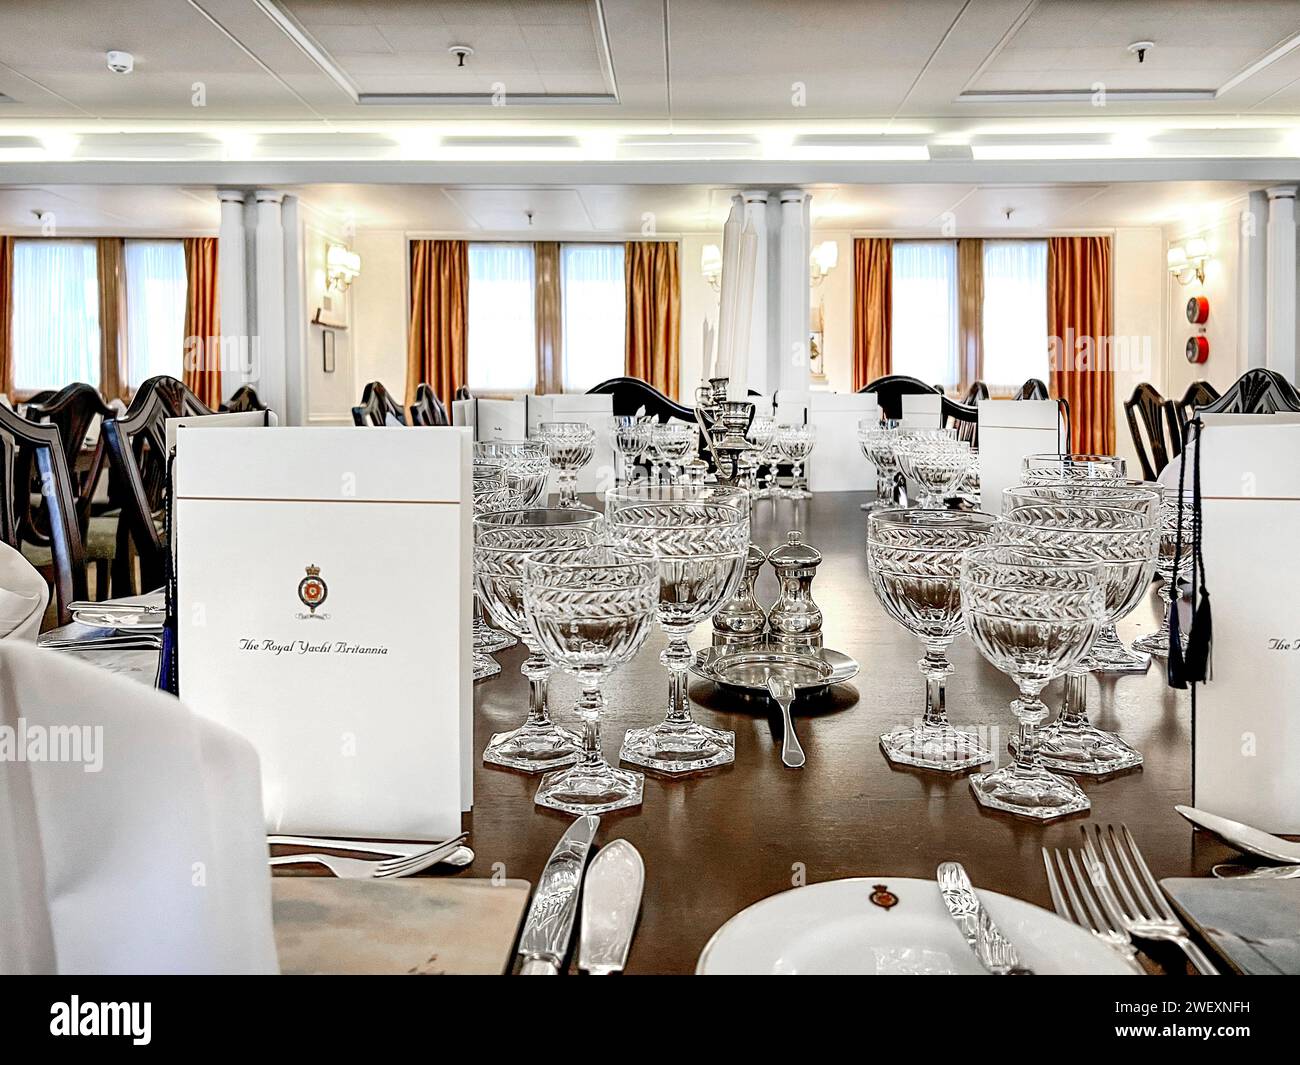 Menus And Table Settings Are Displayed In The State Dining Room Onboard Her Majesty's Yacht Britannia Stock Photo